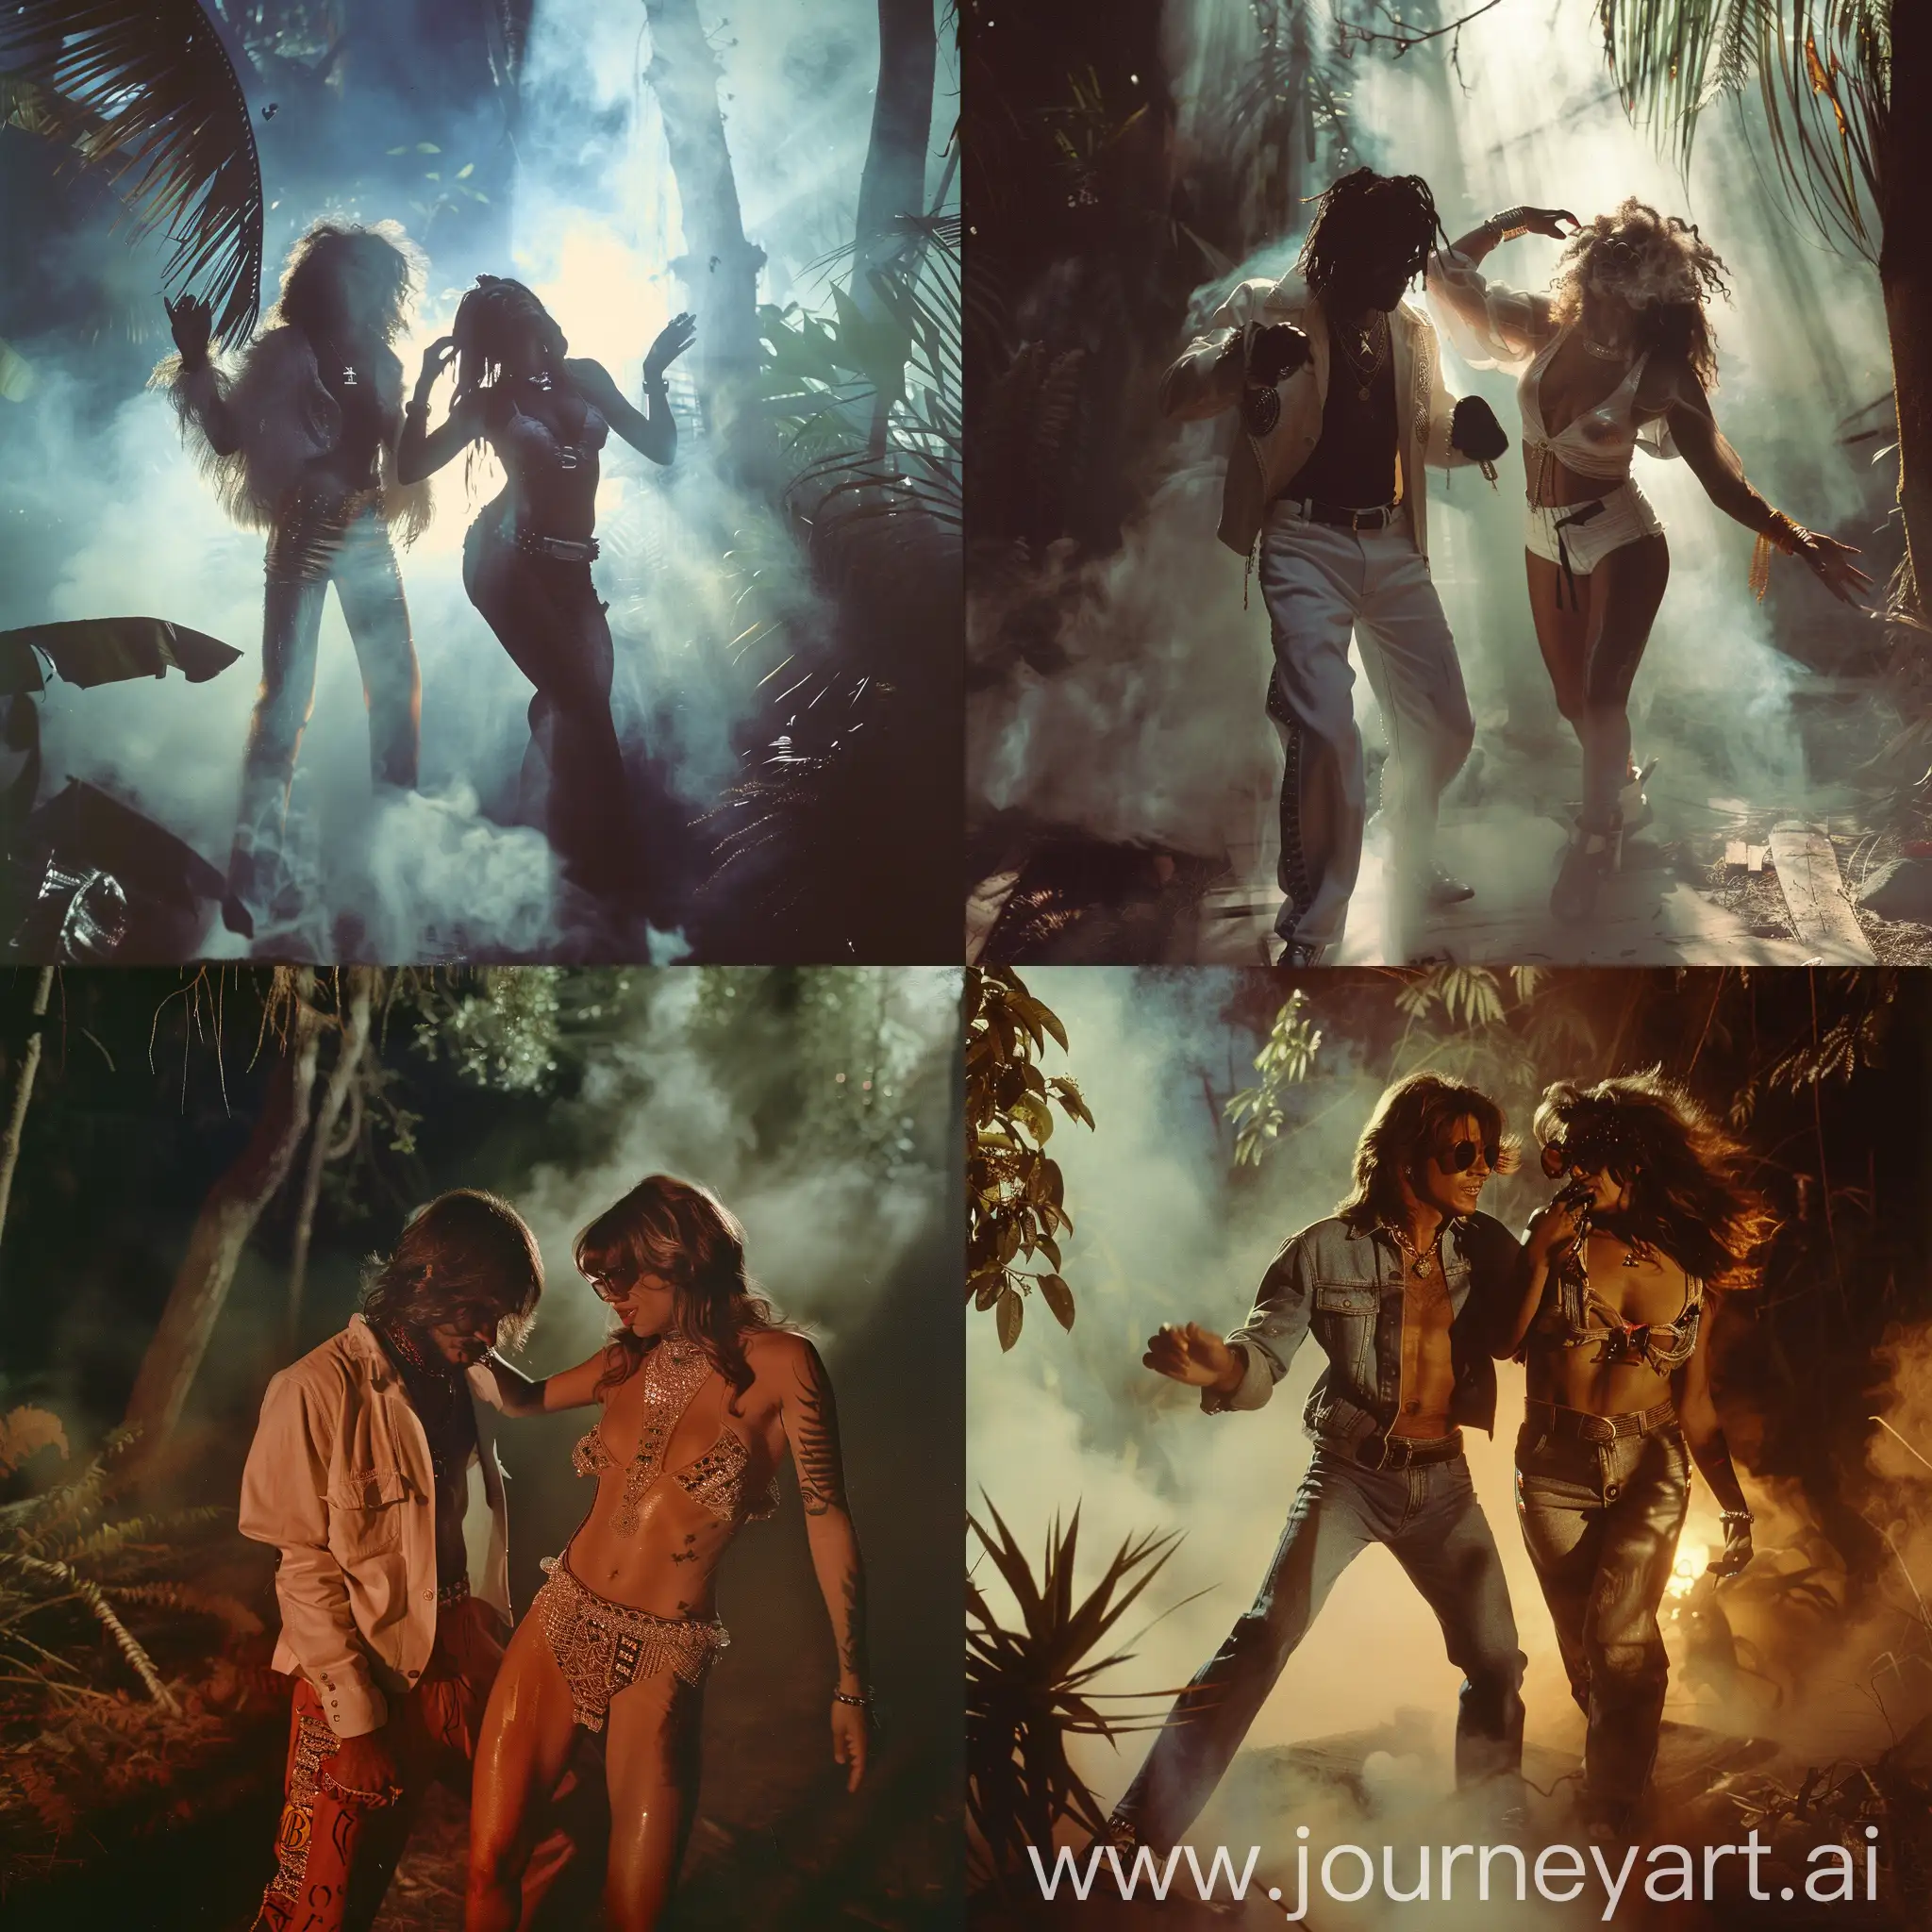 A 1980s Photograph of Juice wrld,dancing next to a woman,in a smokey dark forest.